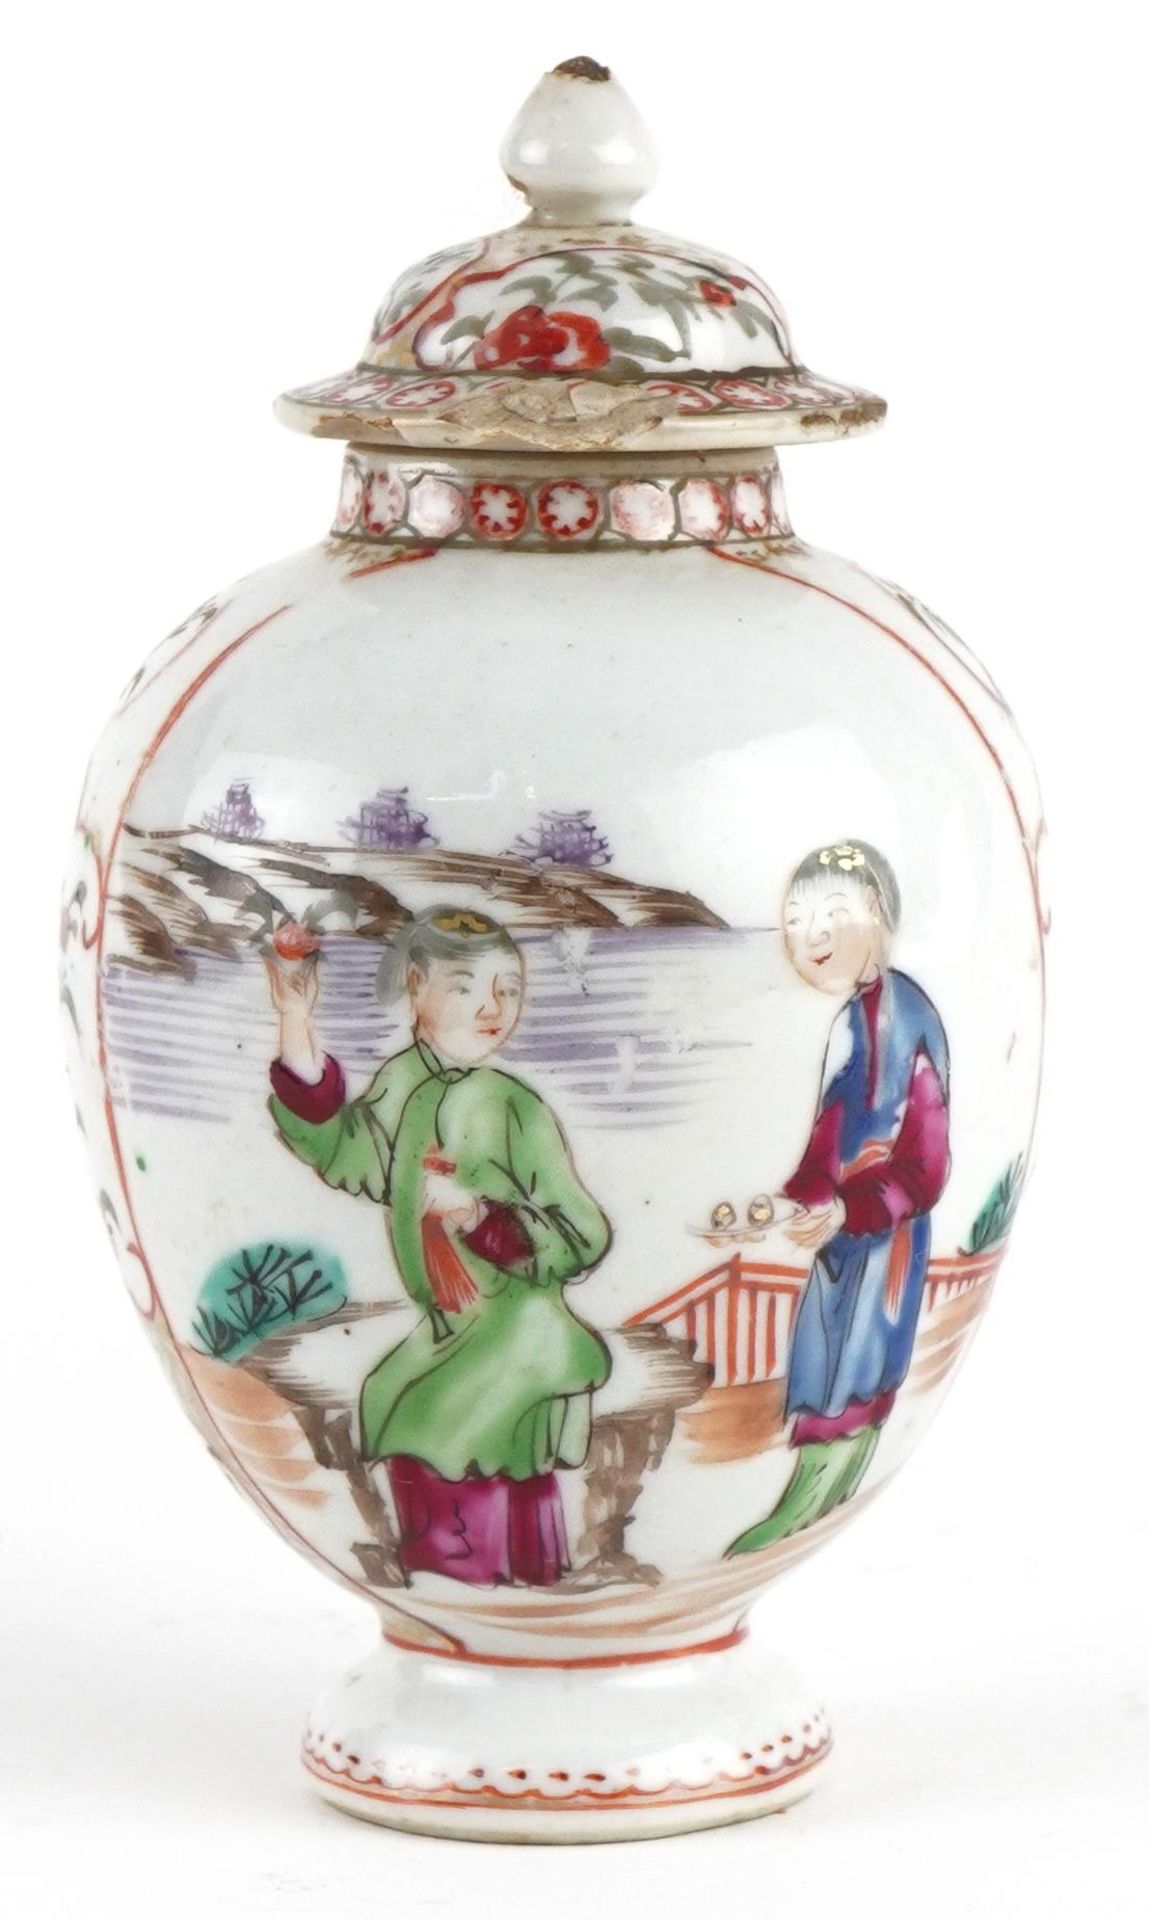 Chinese porcelain lidded tea caddy hand painted in the famille rose palette with figures, 12.5cm